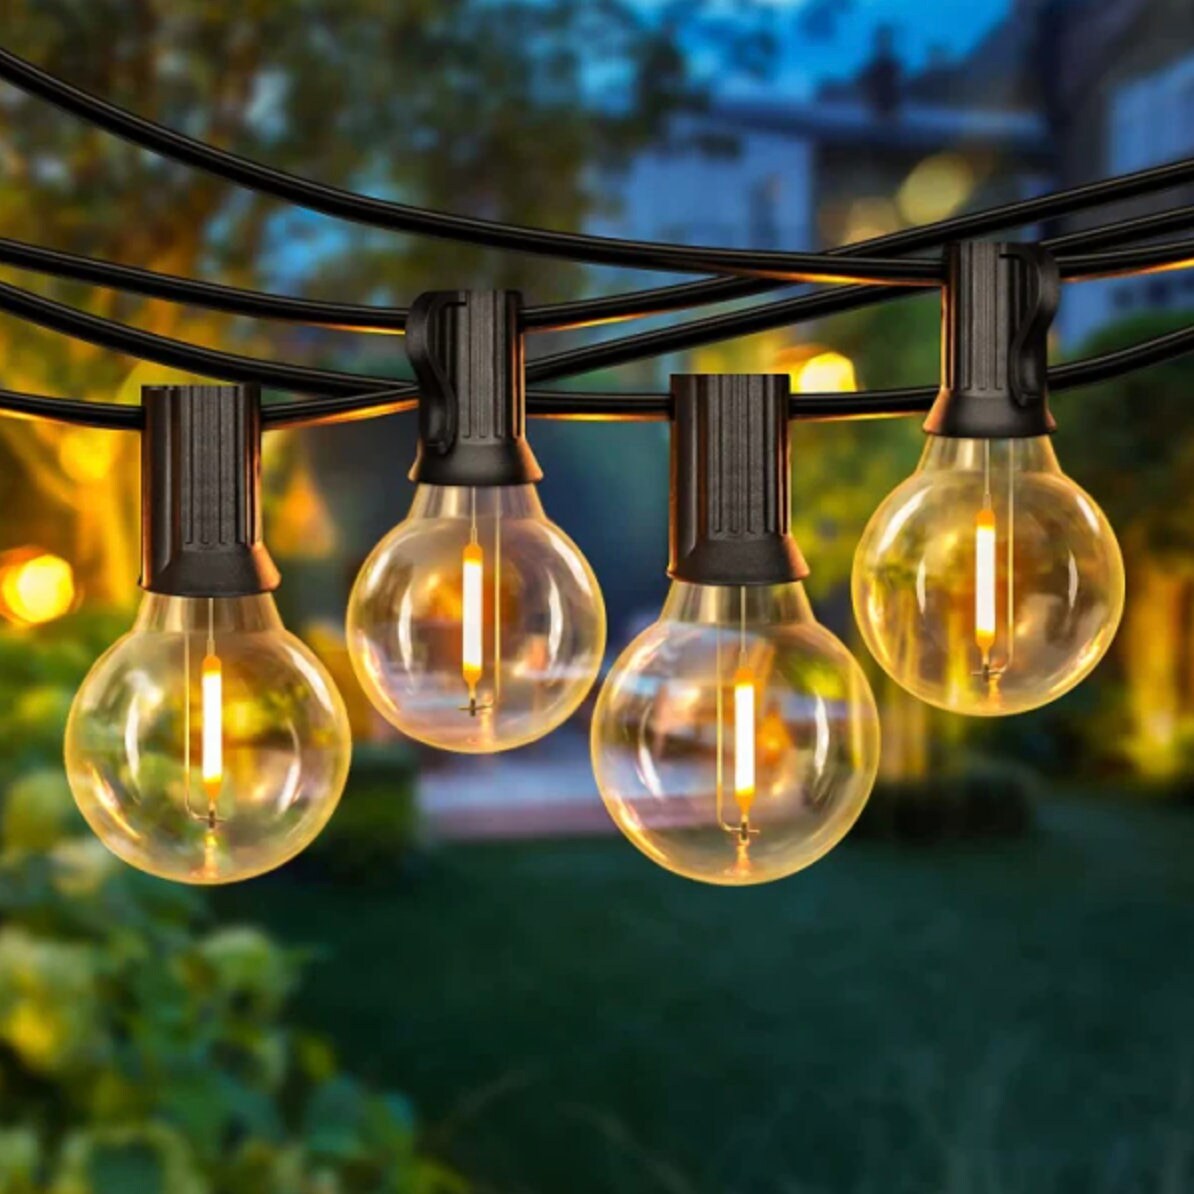 Is Starting Summer with Outdoor Lighting Deals Before Prime Day